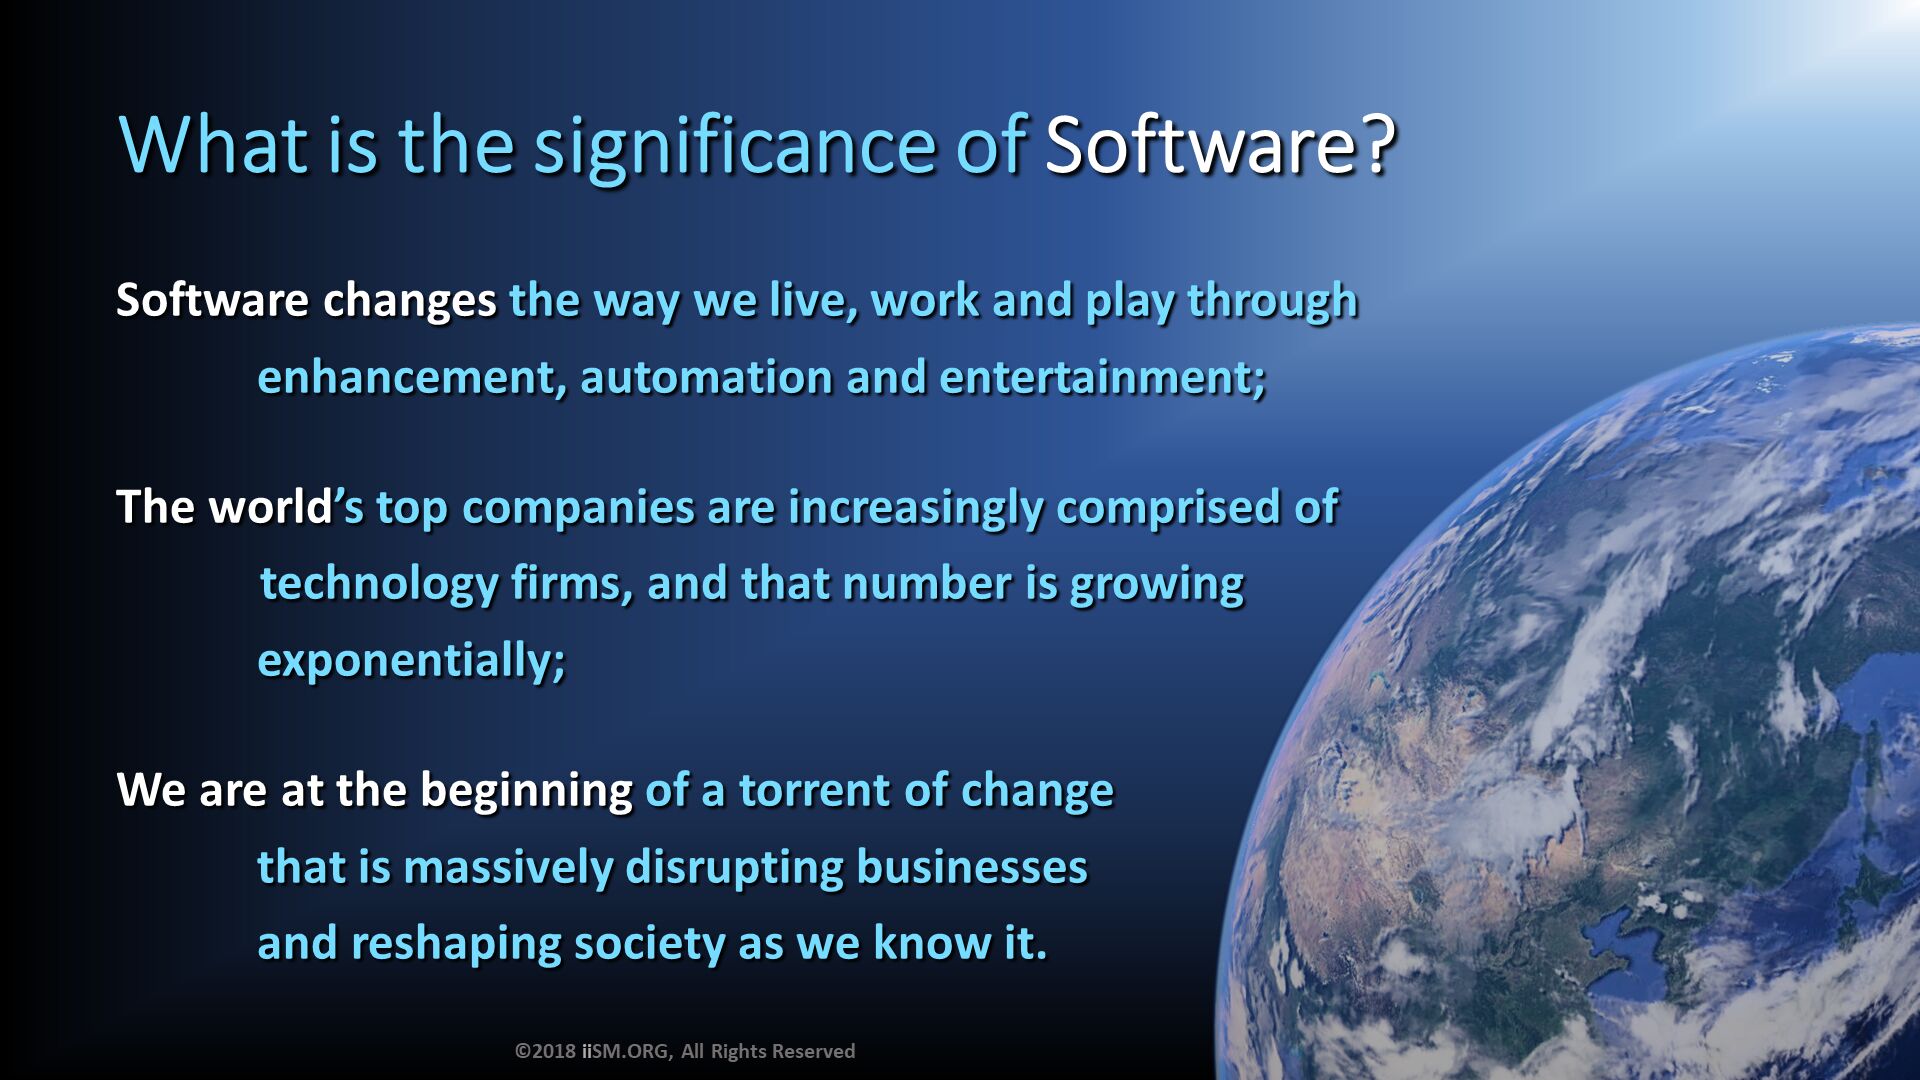 What is the significance of Software?. Software changes the way we live, work and play through
            enhancement, automation and entertainment;

The world’s top companies are increasingly comprised of 
	technology firms, and that number is growing
            exponentially;

We are at the beginning of a torrent of change 
            that is massively disrupting businesses 
            and reshaping society as we know it. ©2018 iiSM.ORG, All Rights Reserved. 